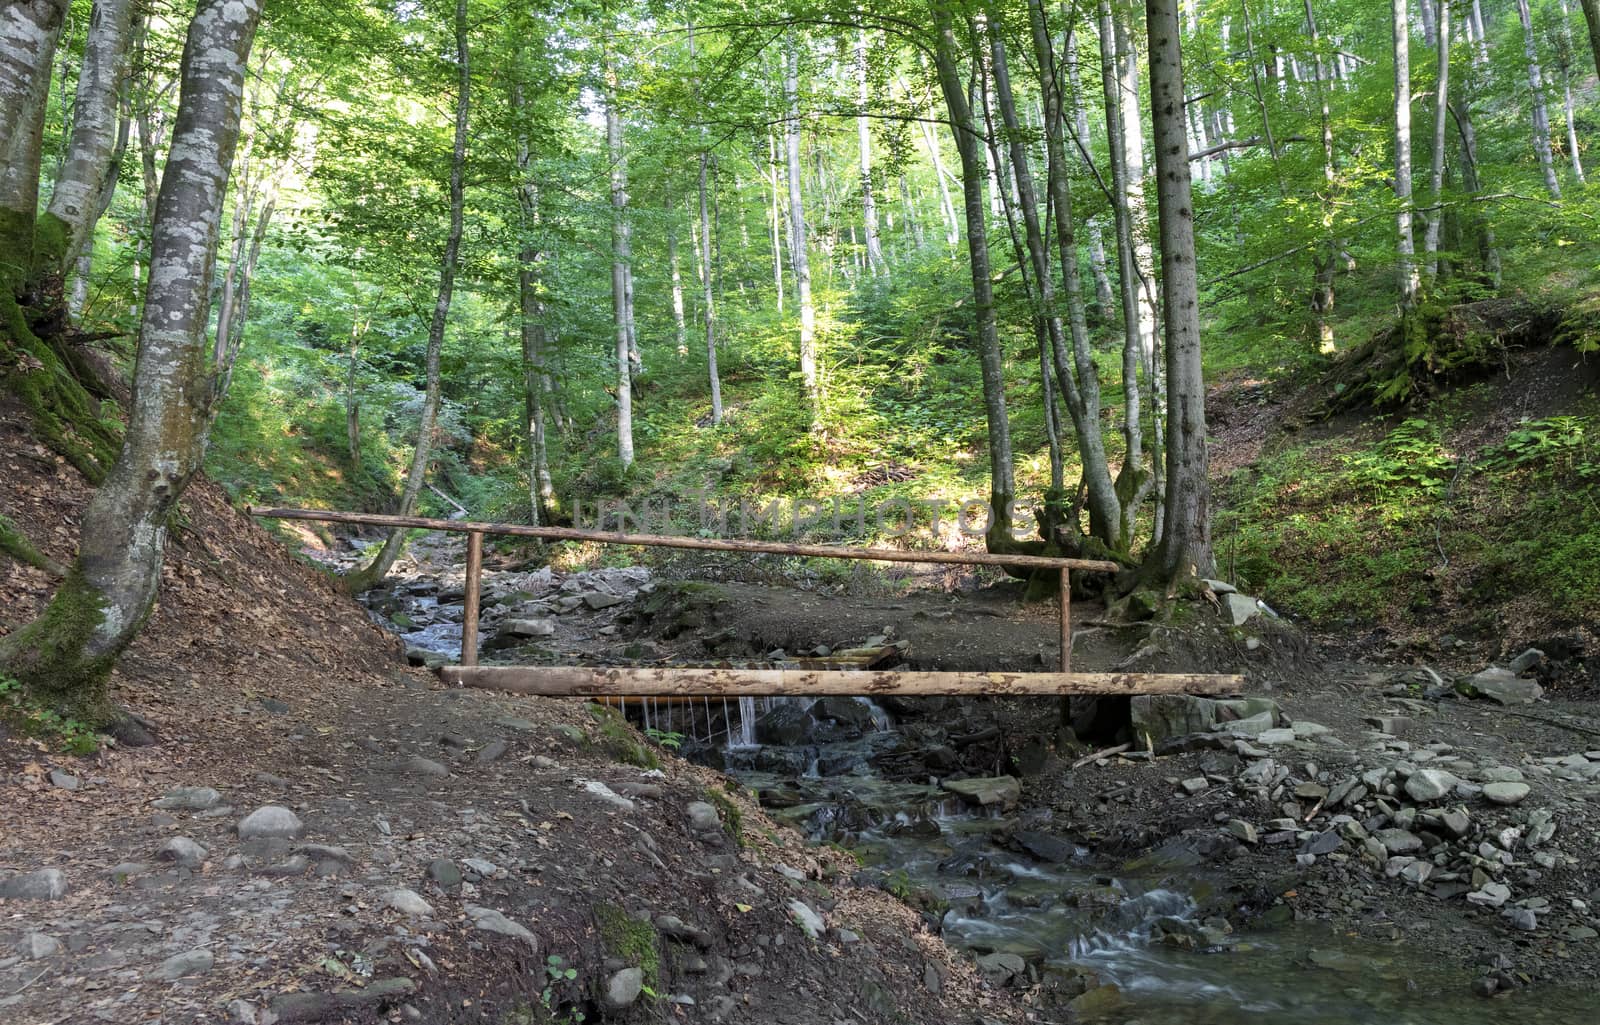 A small wooden bridge leading through a mountain stream in a picturesque wild forest between hilly slopes